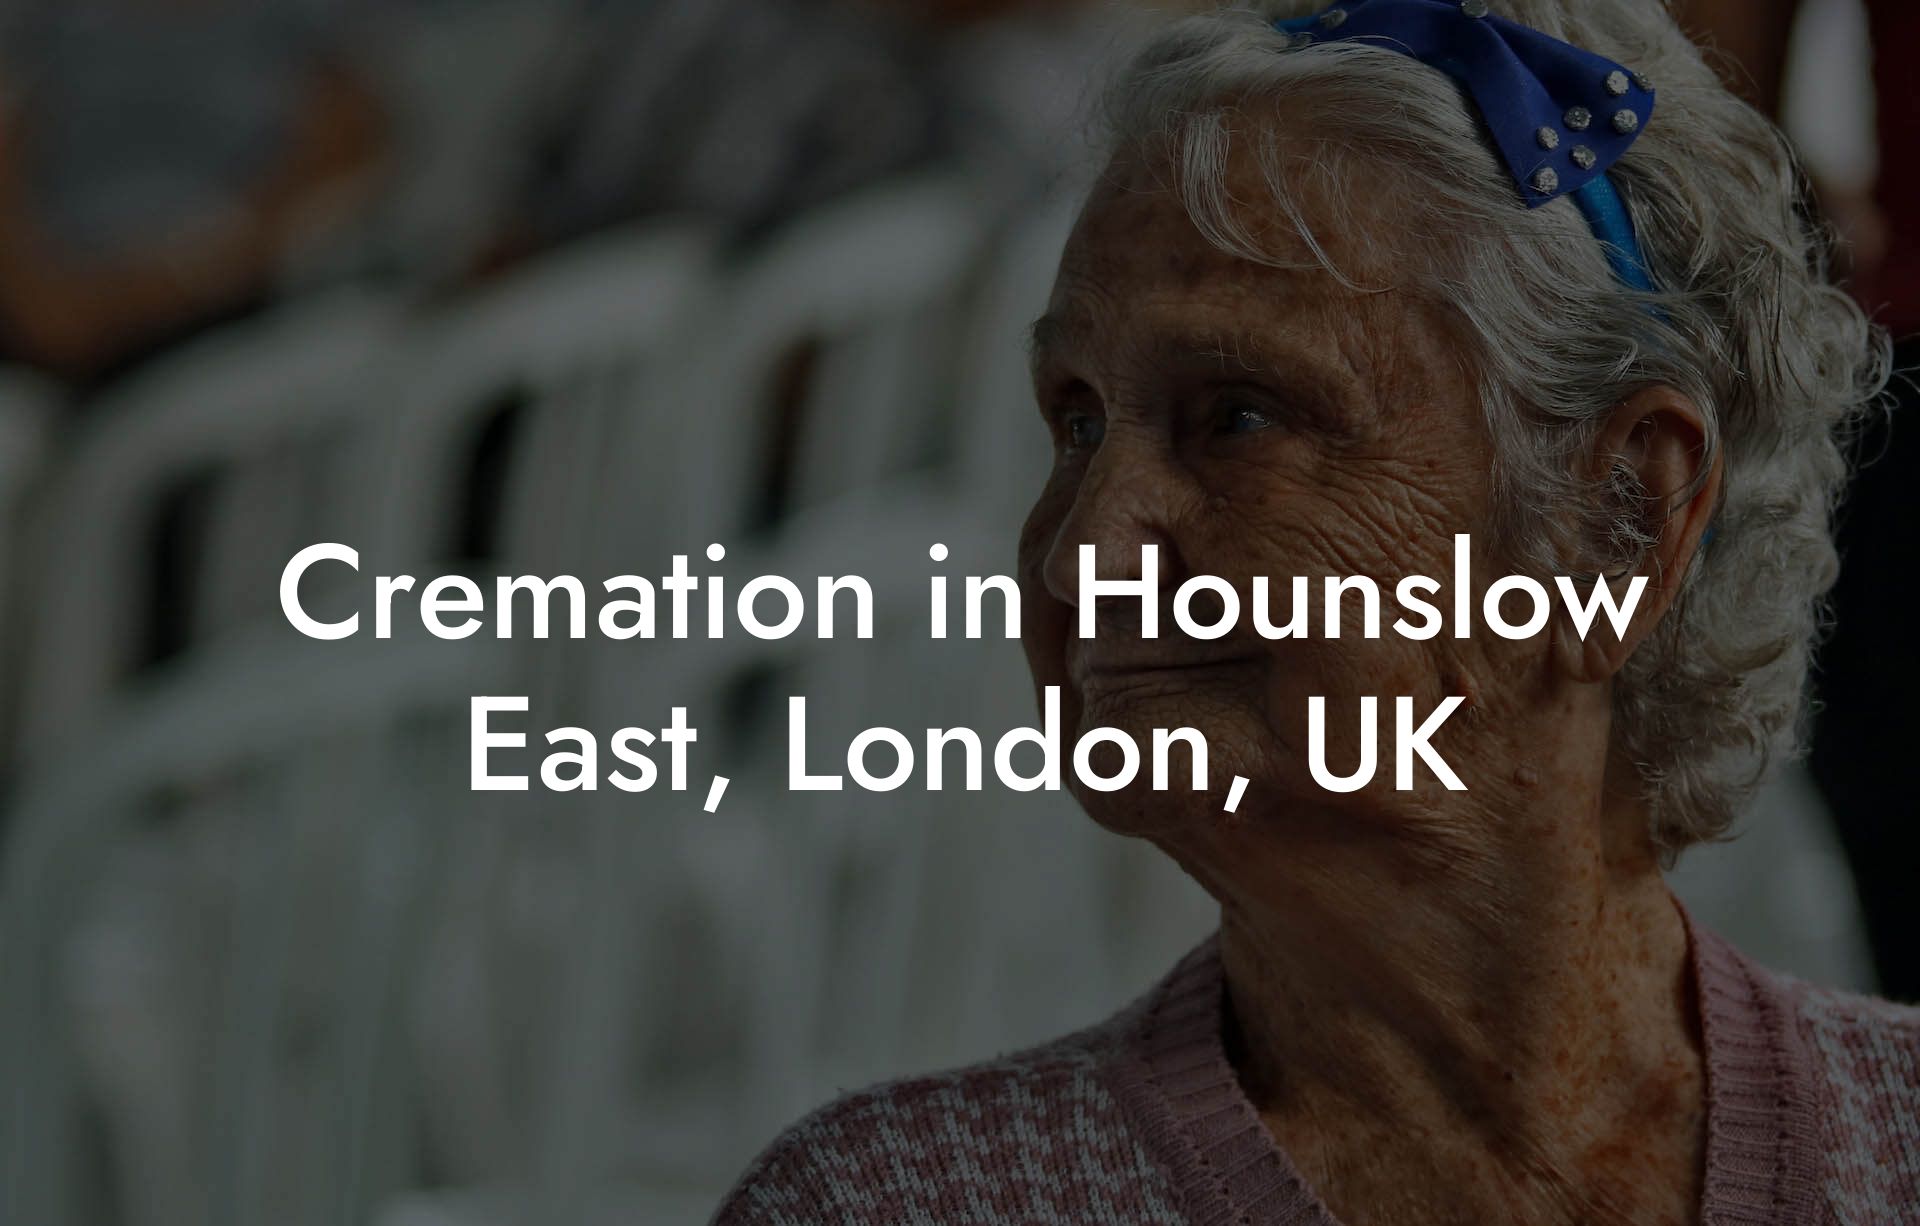 Cremation in Hounslow East, London, UK